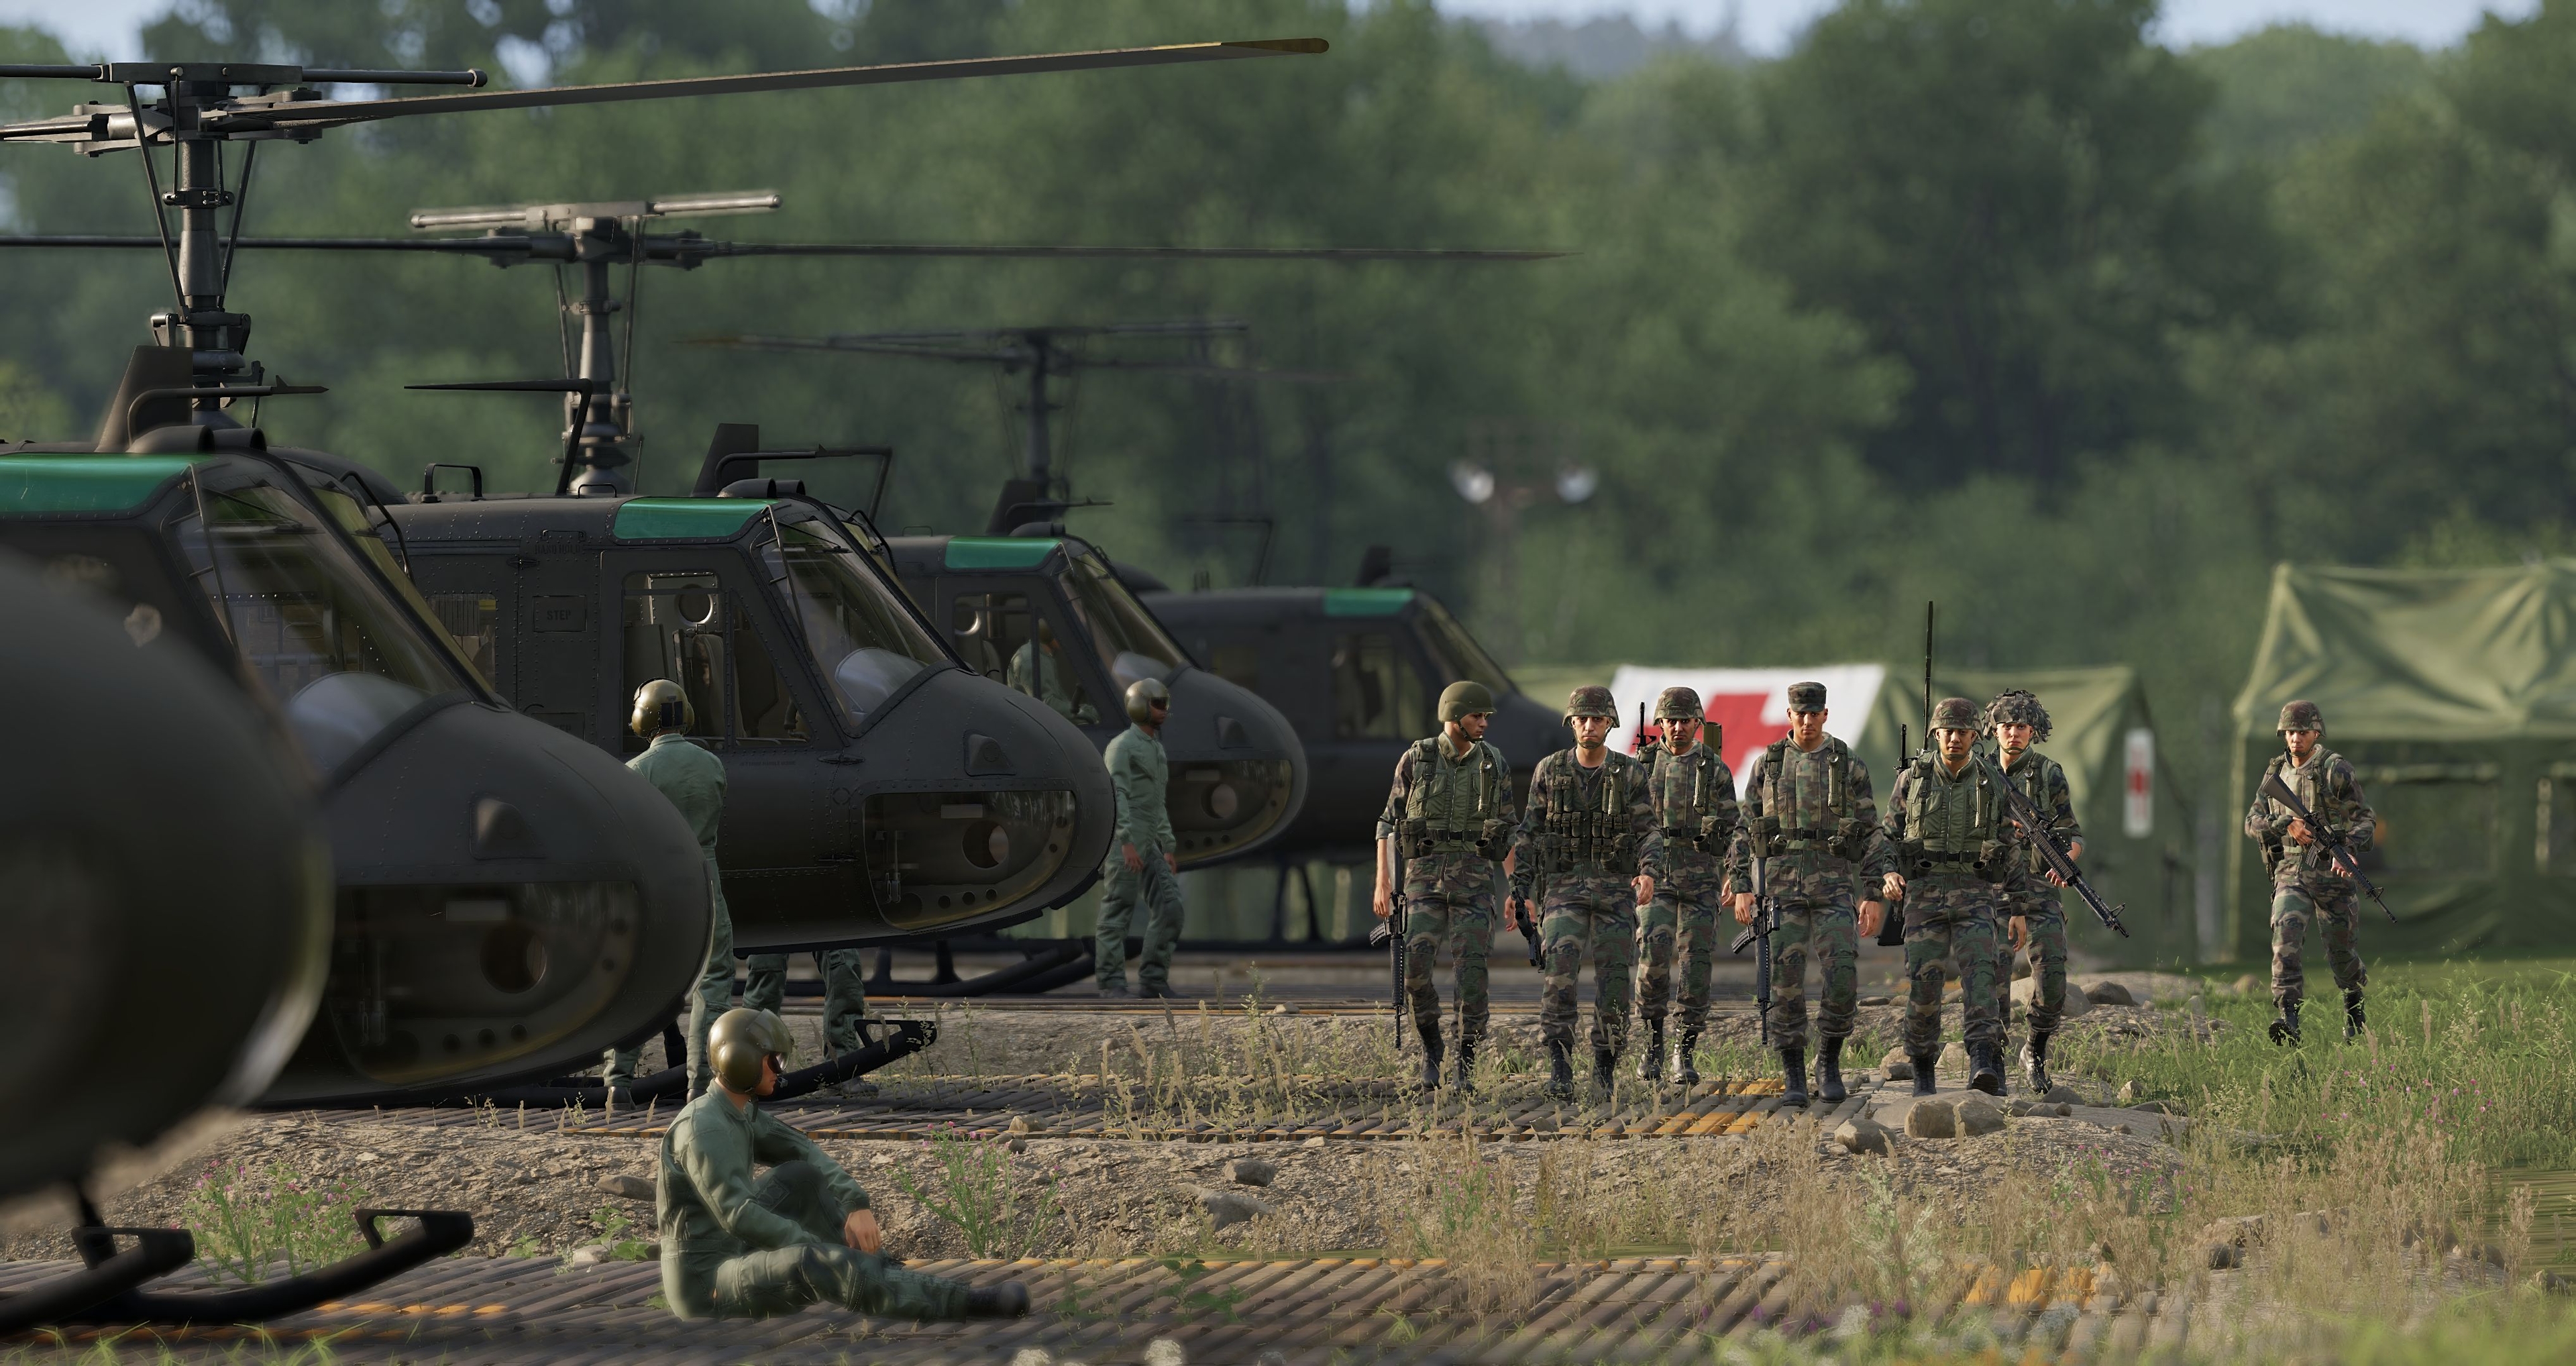 Helicopters with Soldiers